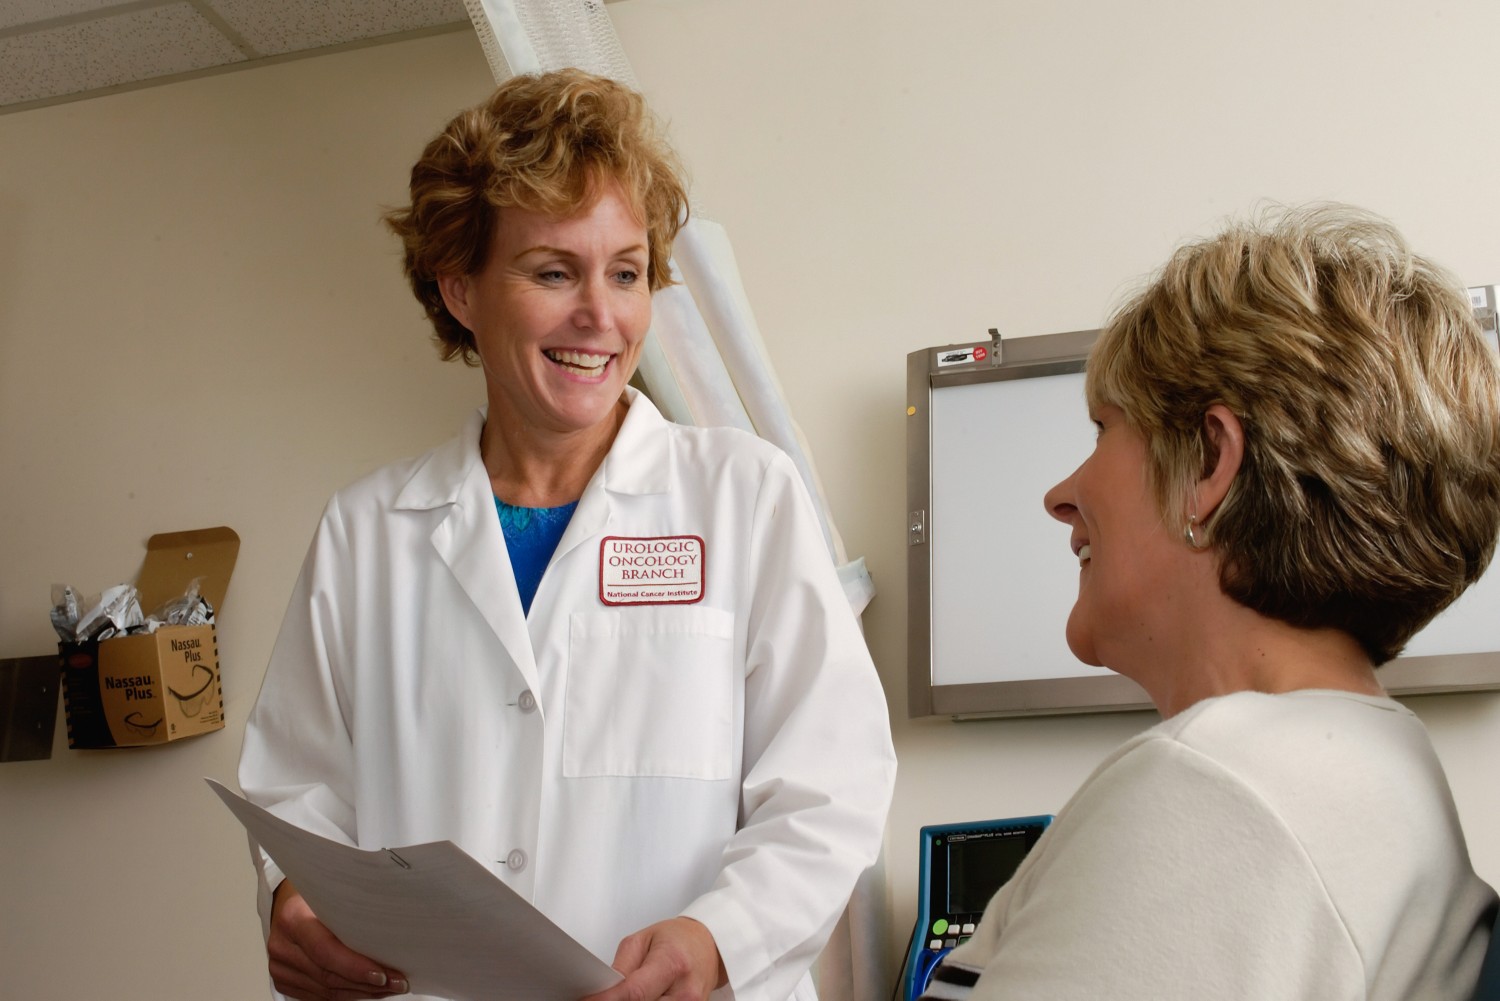 A female doctor talking to a patient